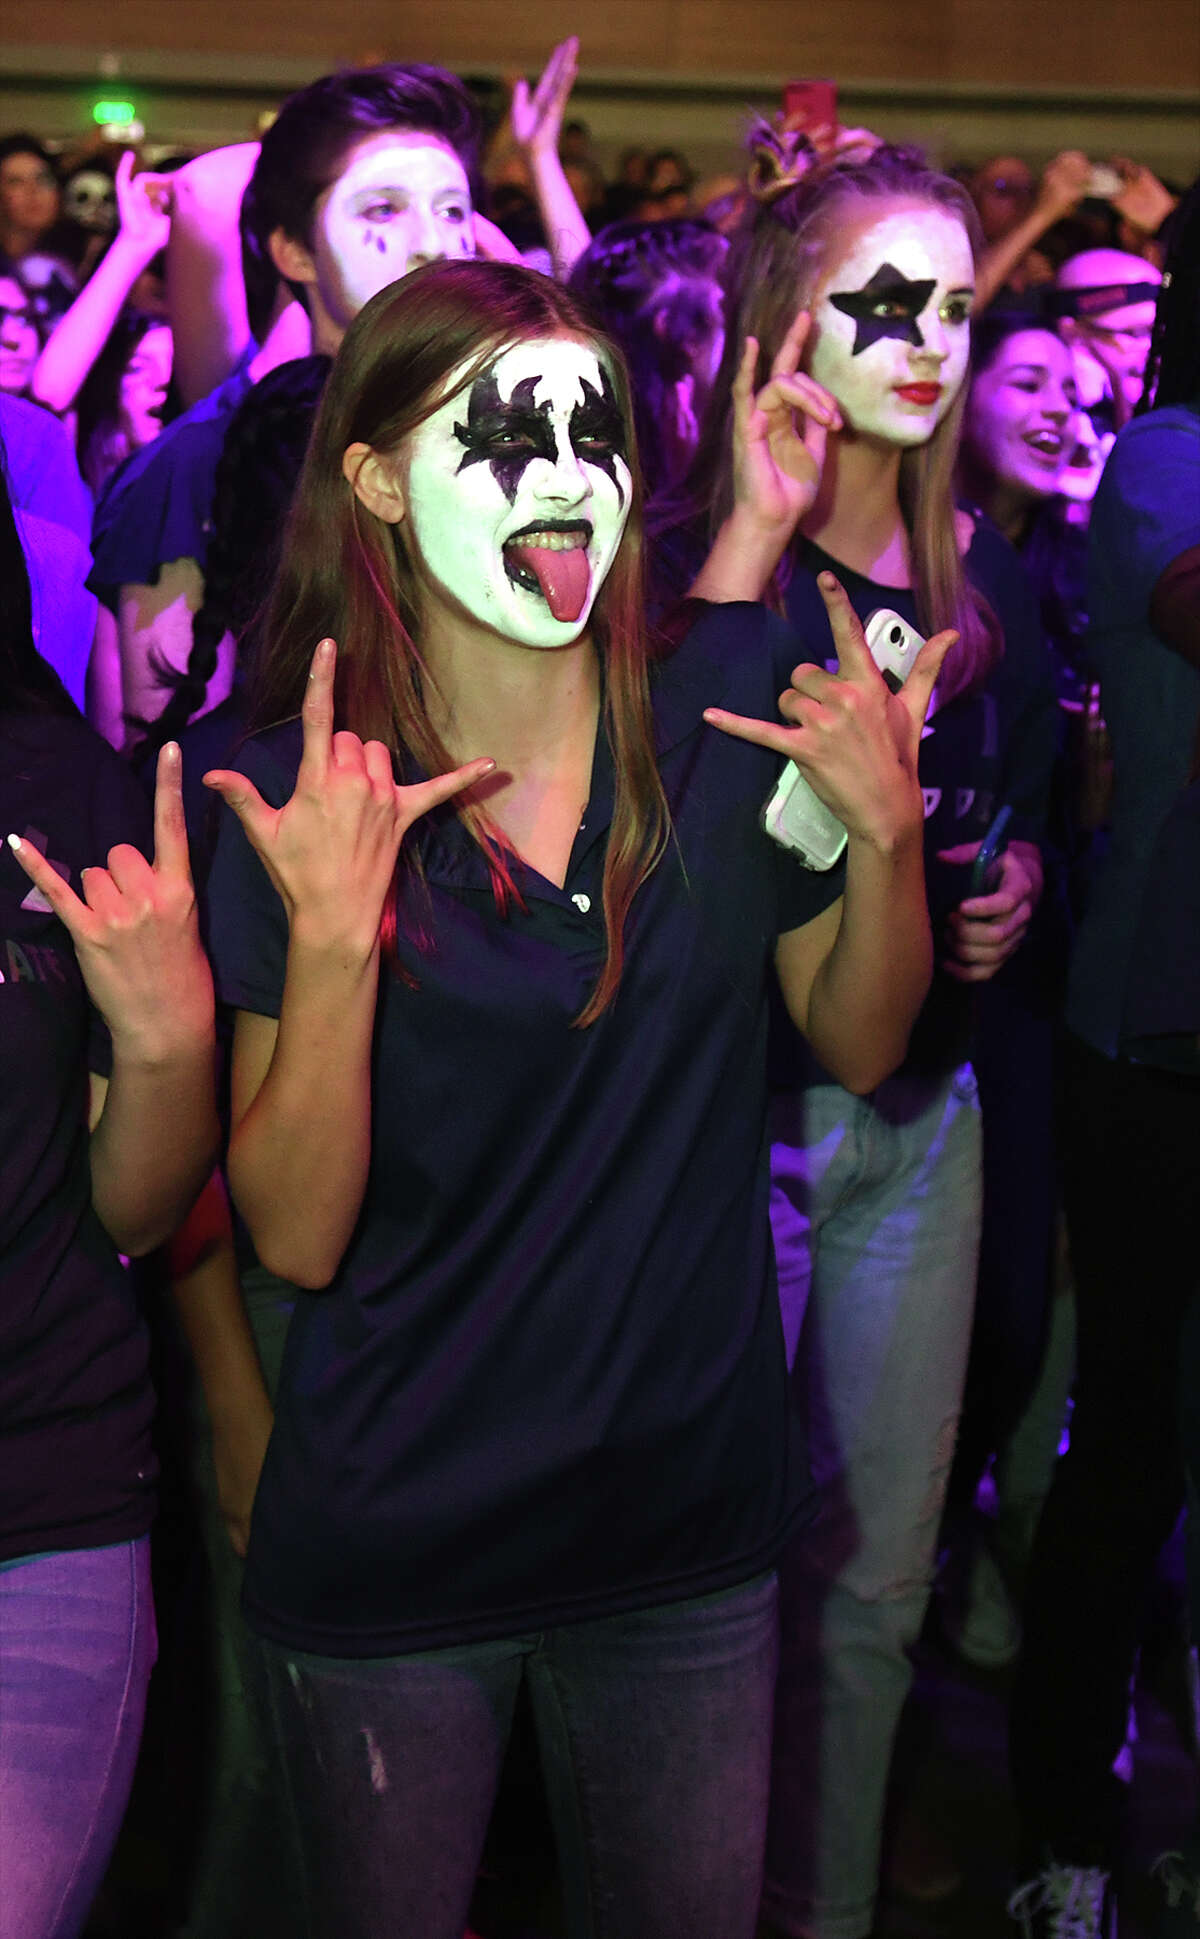 Kingwood High School students join KISS during their performance of "Rock and Roll All Night" during their fundraising campaign at Smart Financial Centre in Sugar land on Sept. 26, 2017. (Photo by Jerry Baker/Freelance)